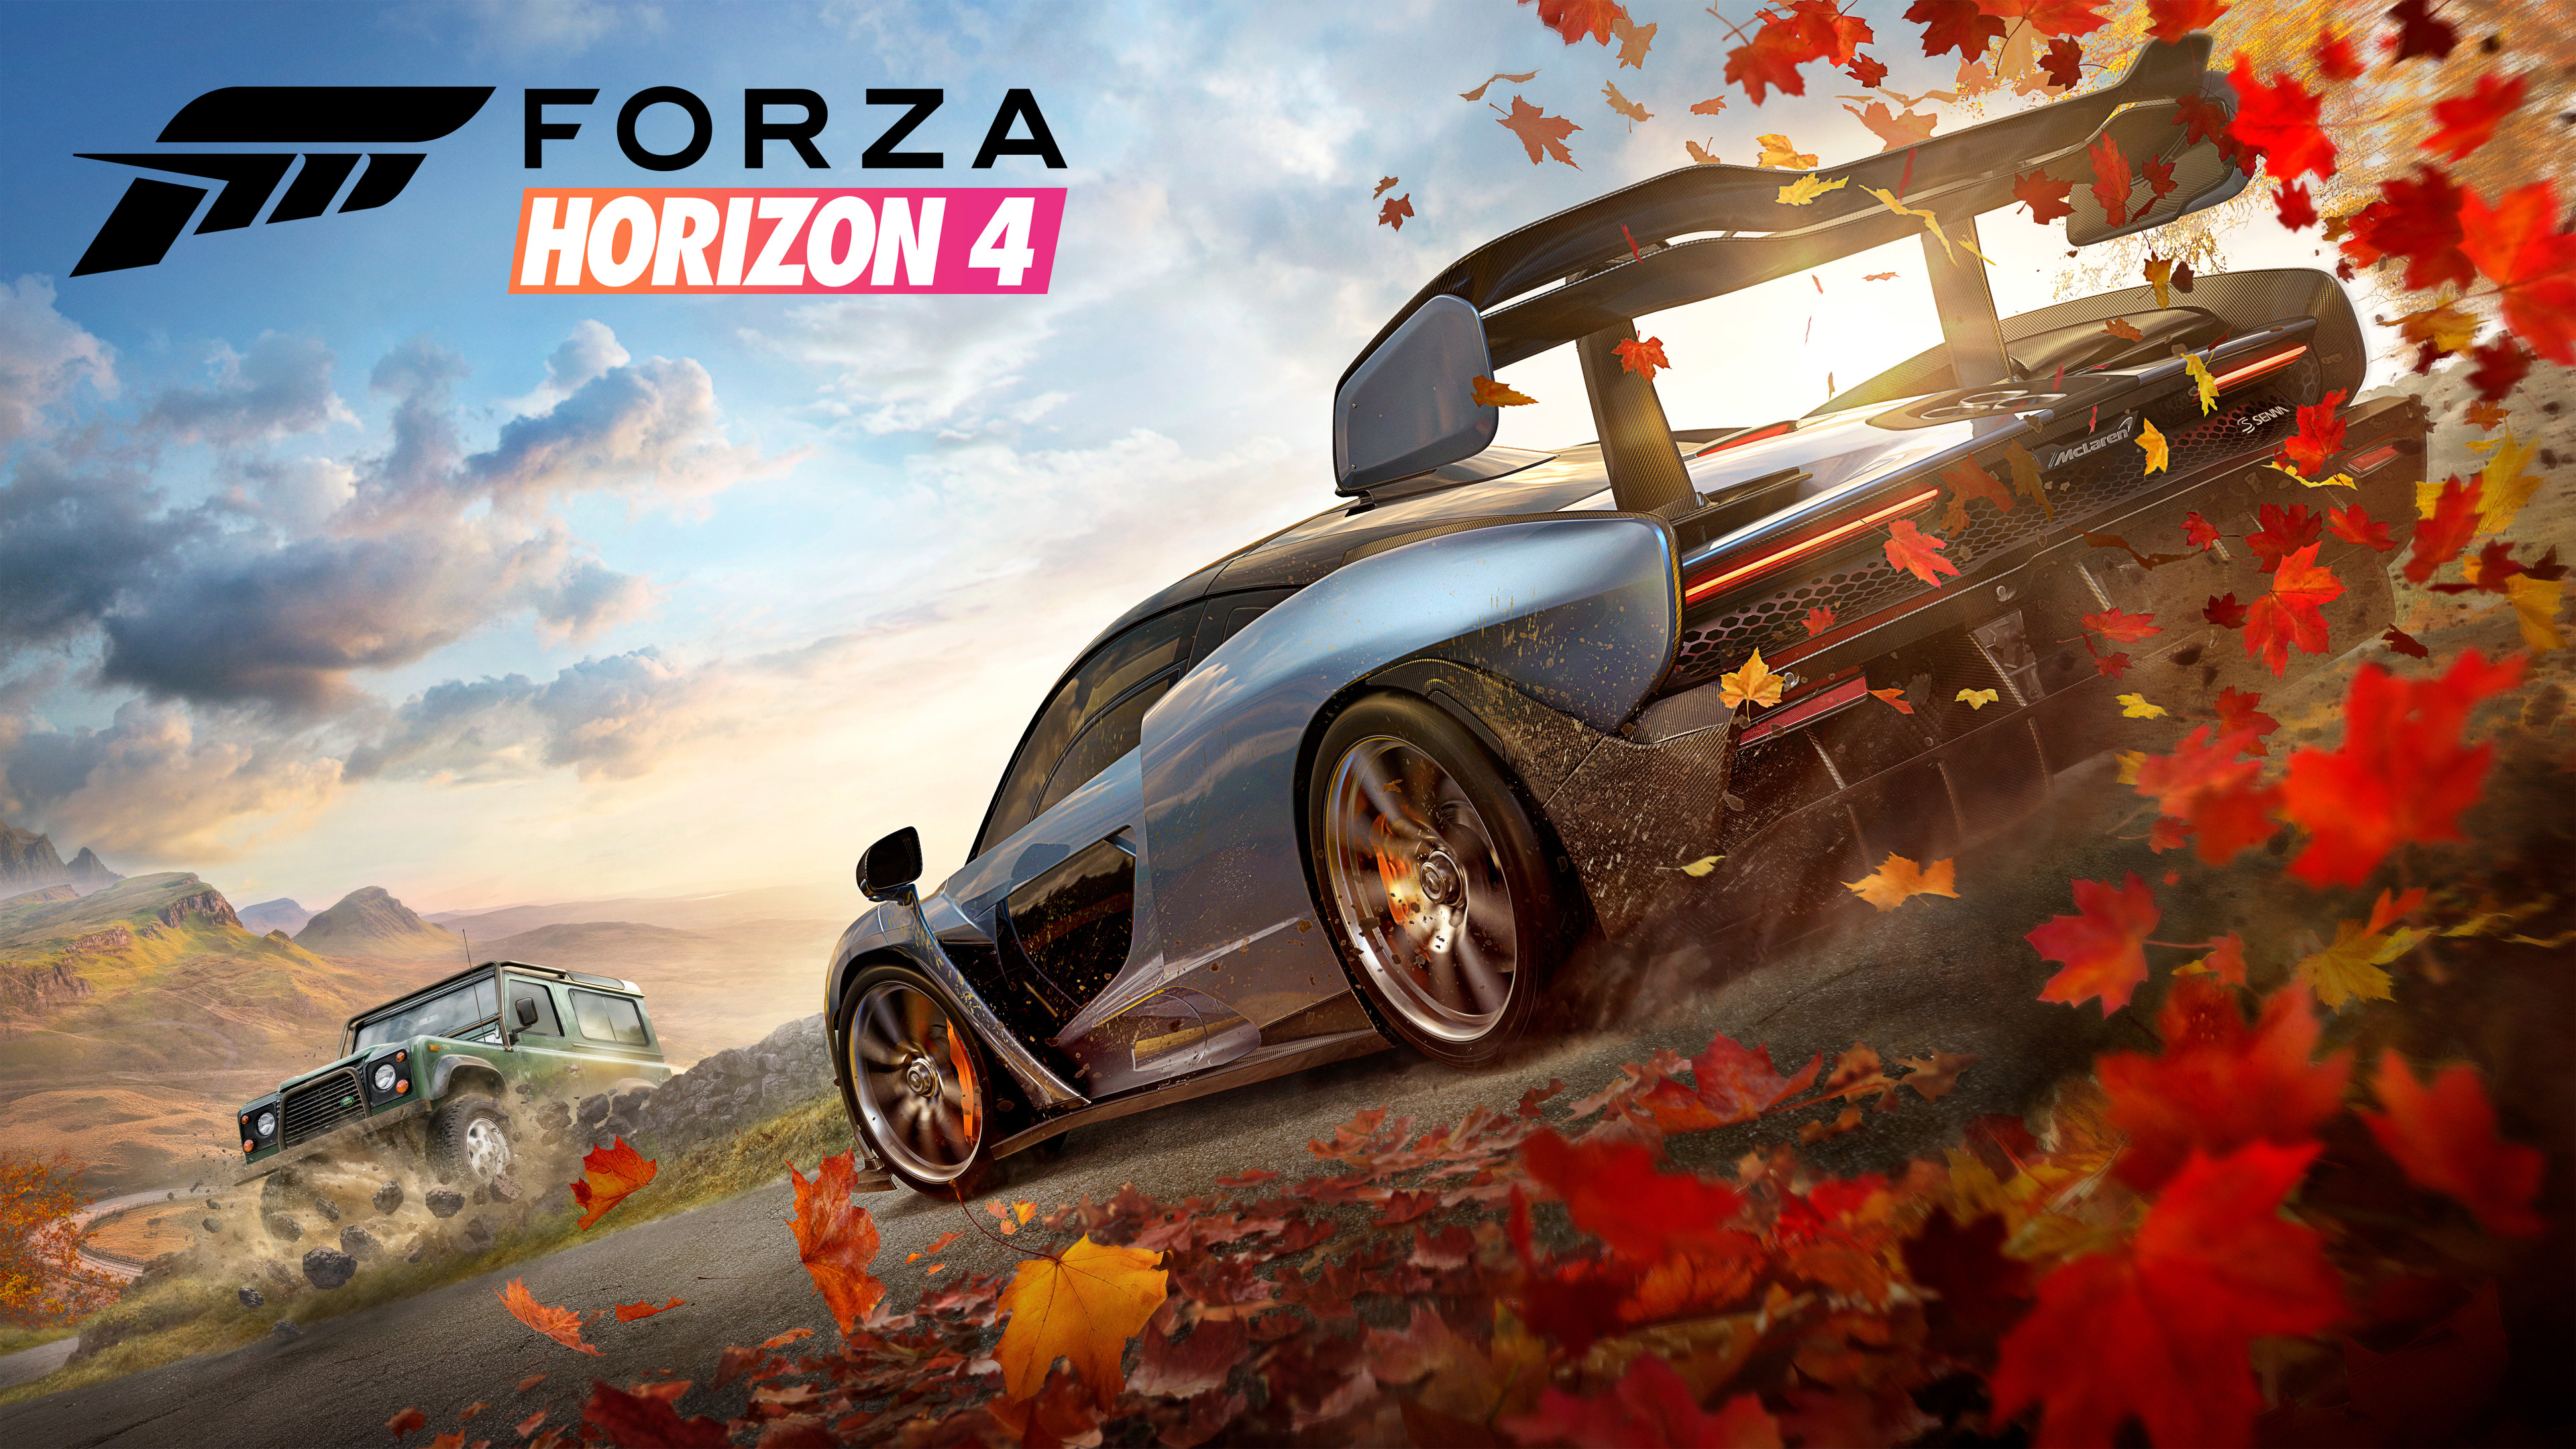 2018 Forza Horizon 4 4k, HD Games, 4k Wallpapers, Images, Backgrounds